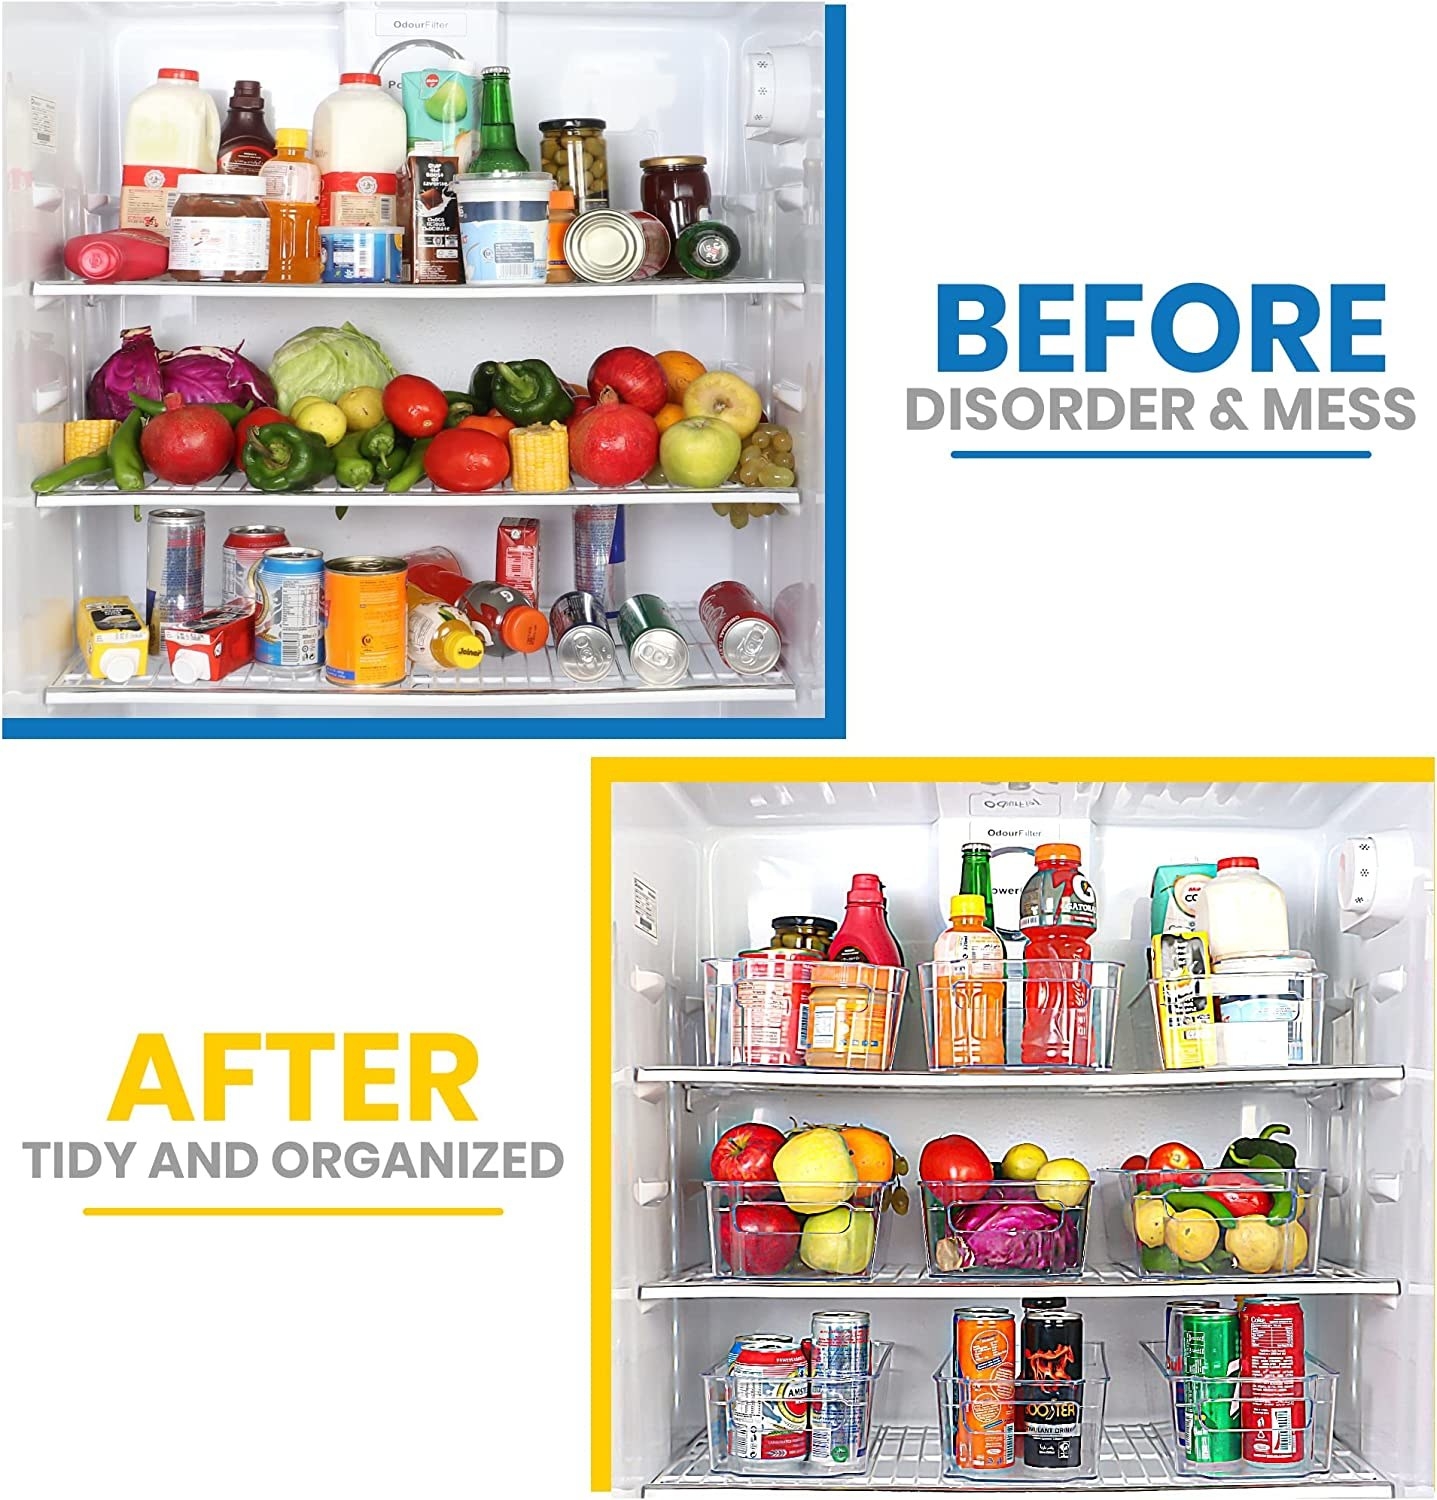 top: before image showing cluttered fridge with no organization / bottom: after image of organized fridge with clear drawers and more space